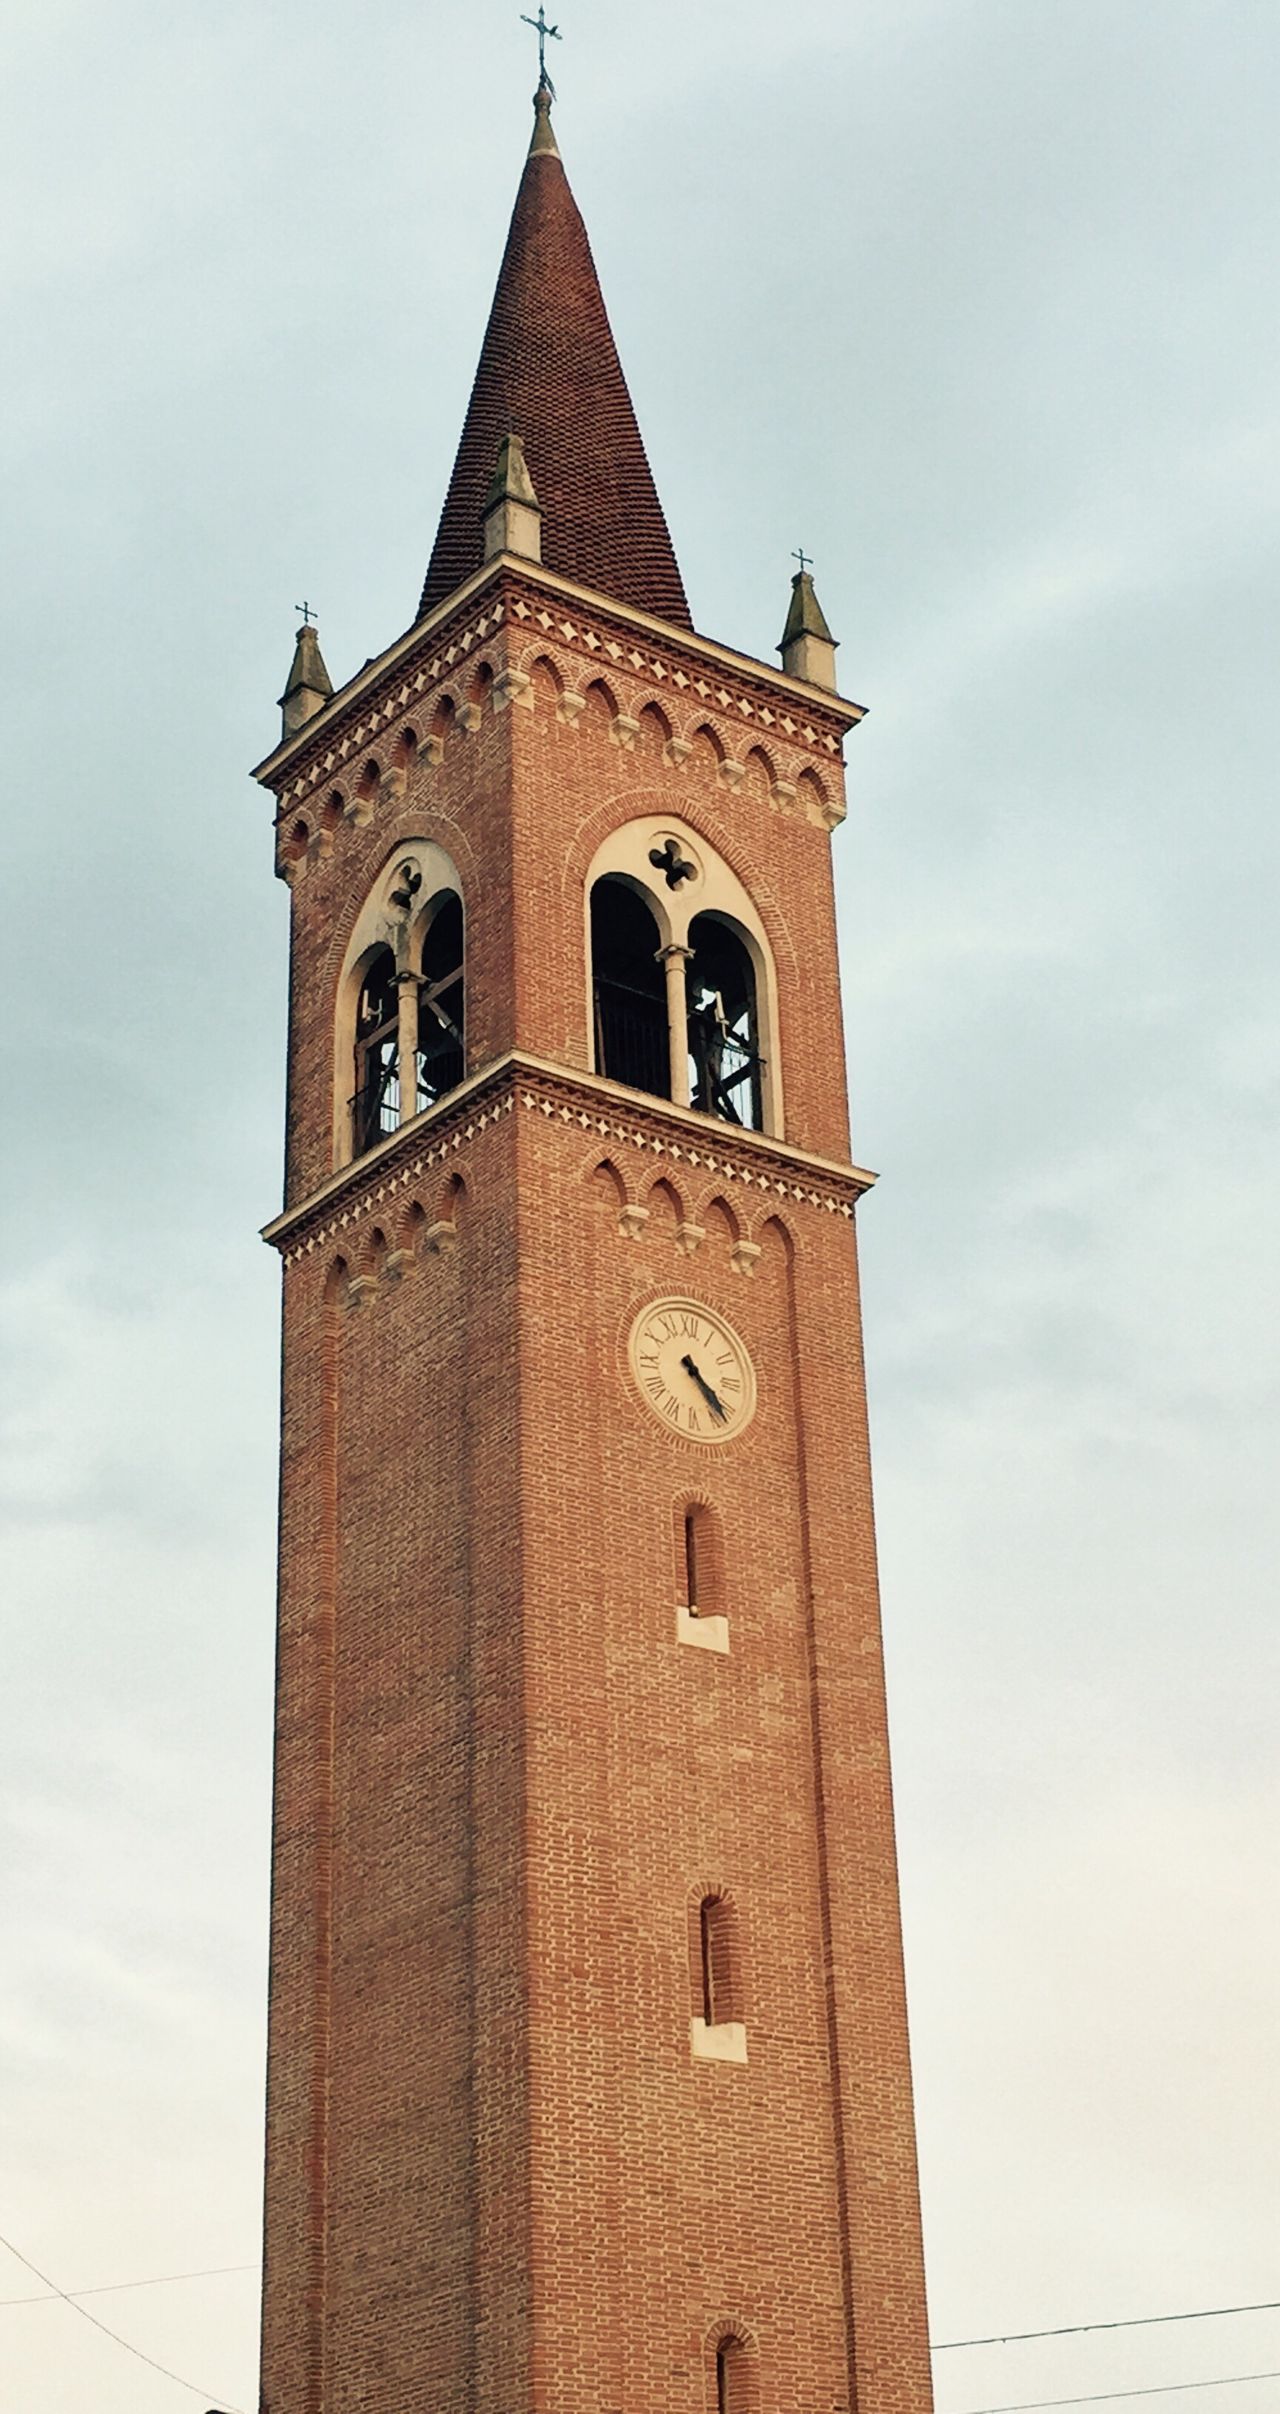 Chruch tower